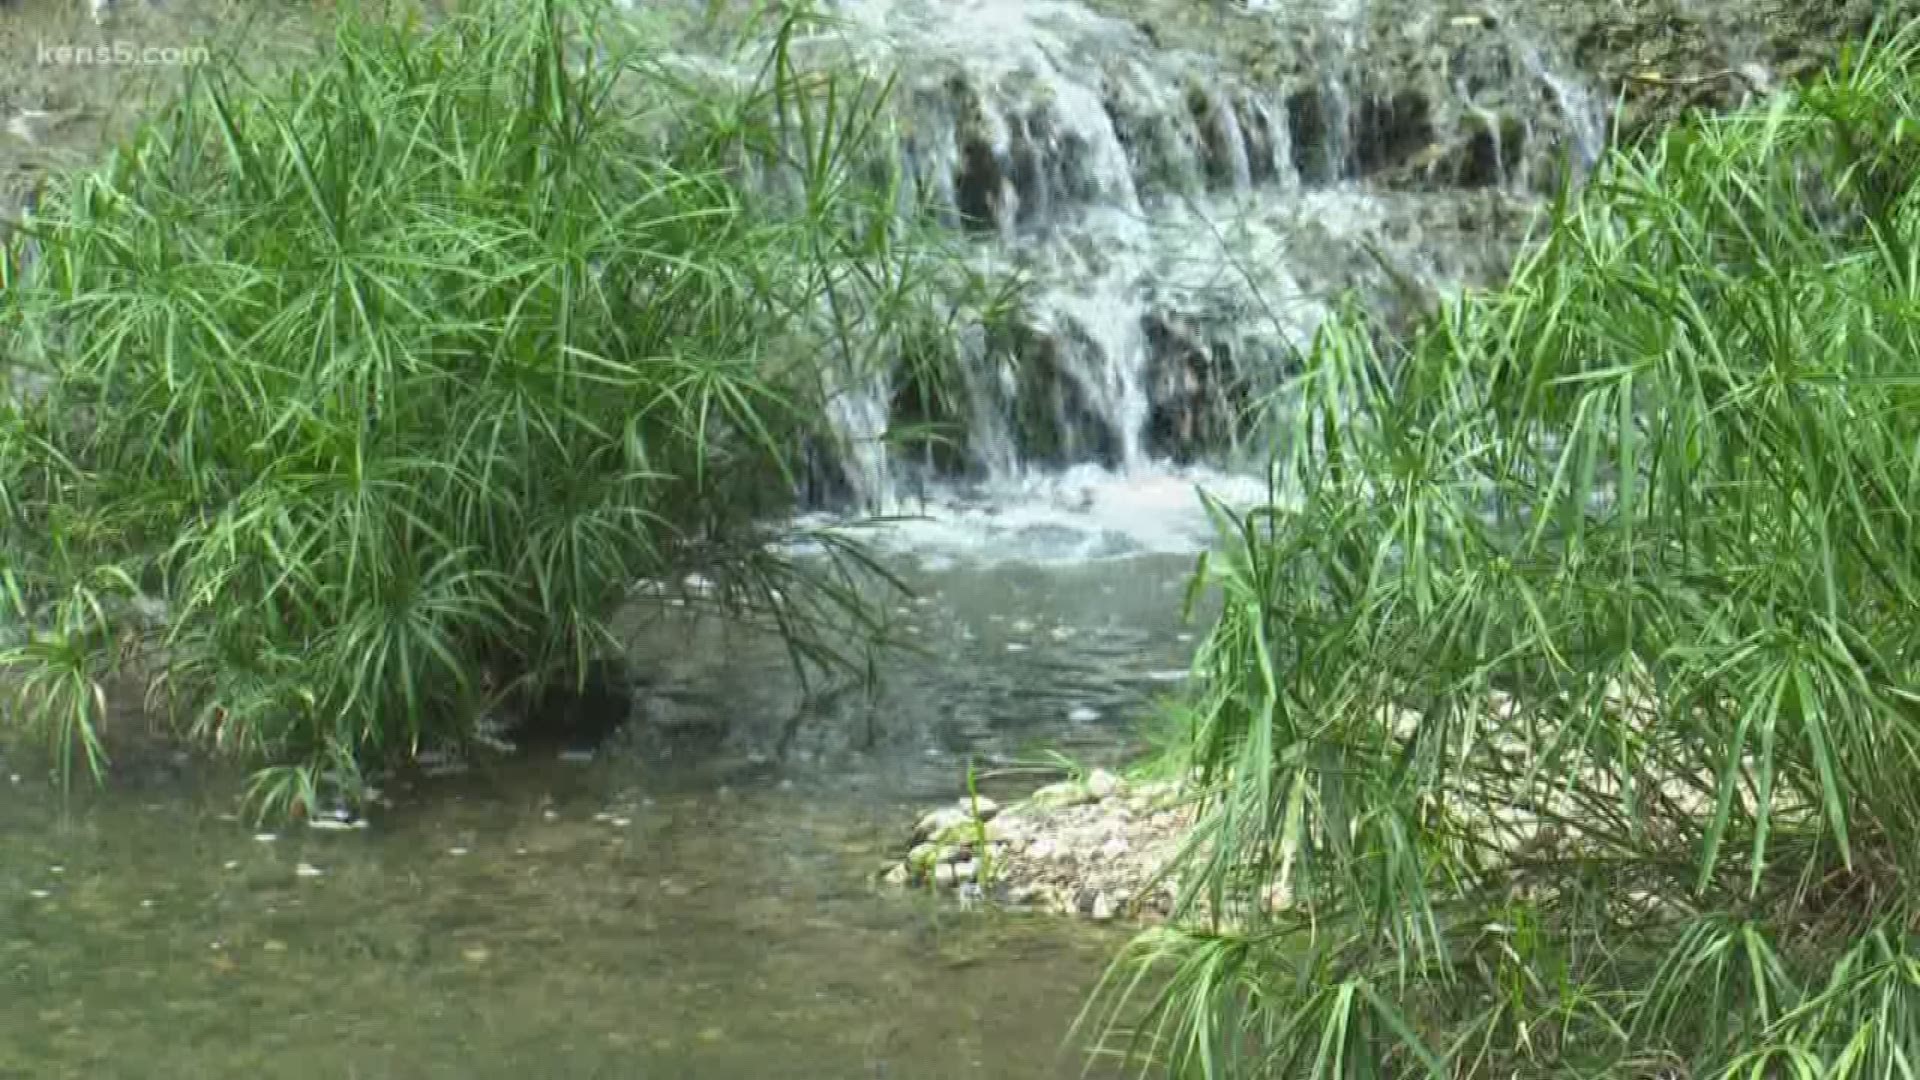 A study found fecal contamination in local natural waterways.